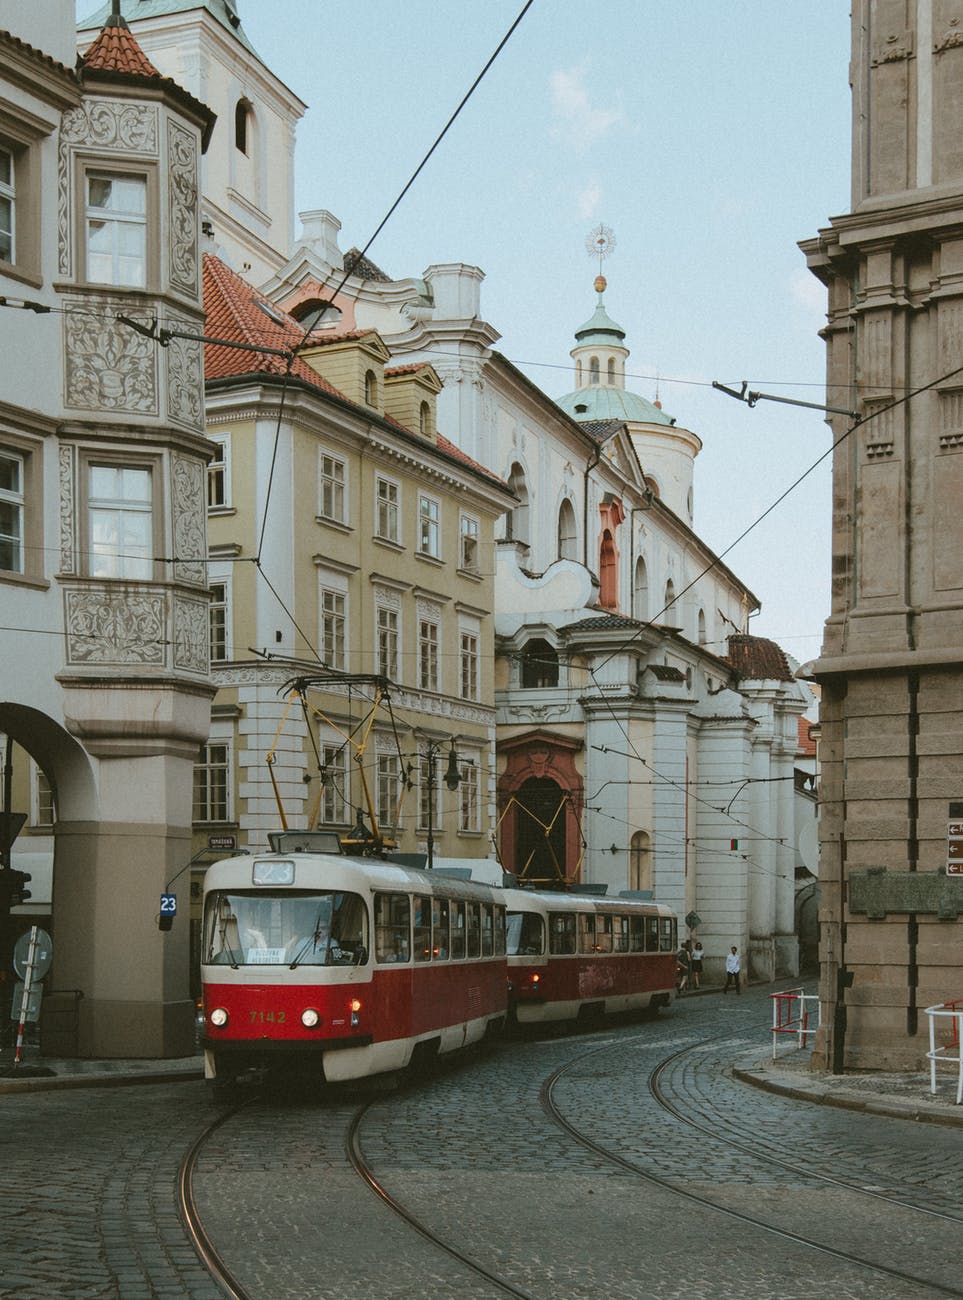 5 ways to make travelling around central Europe easier